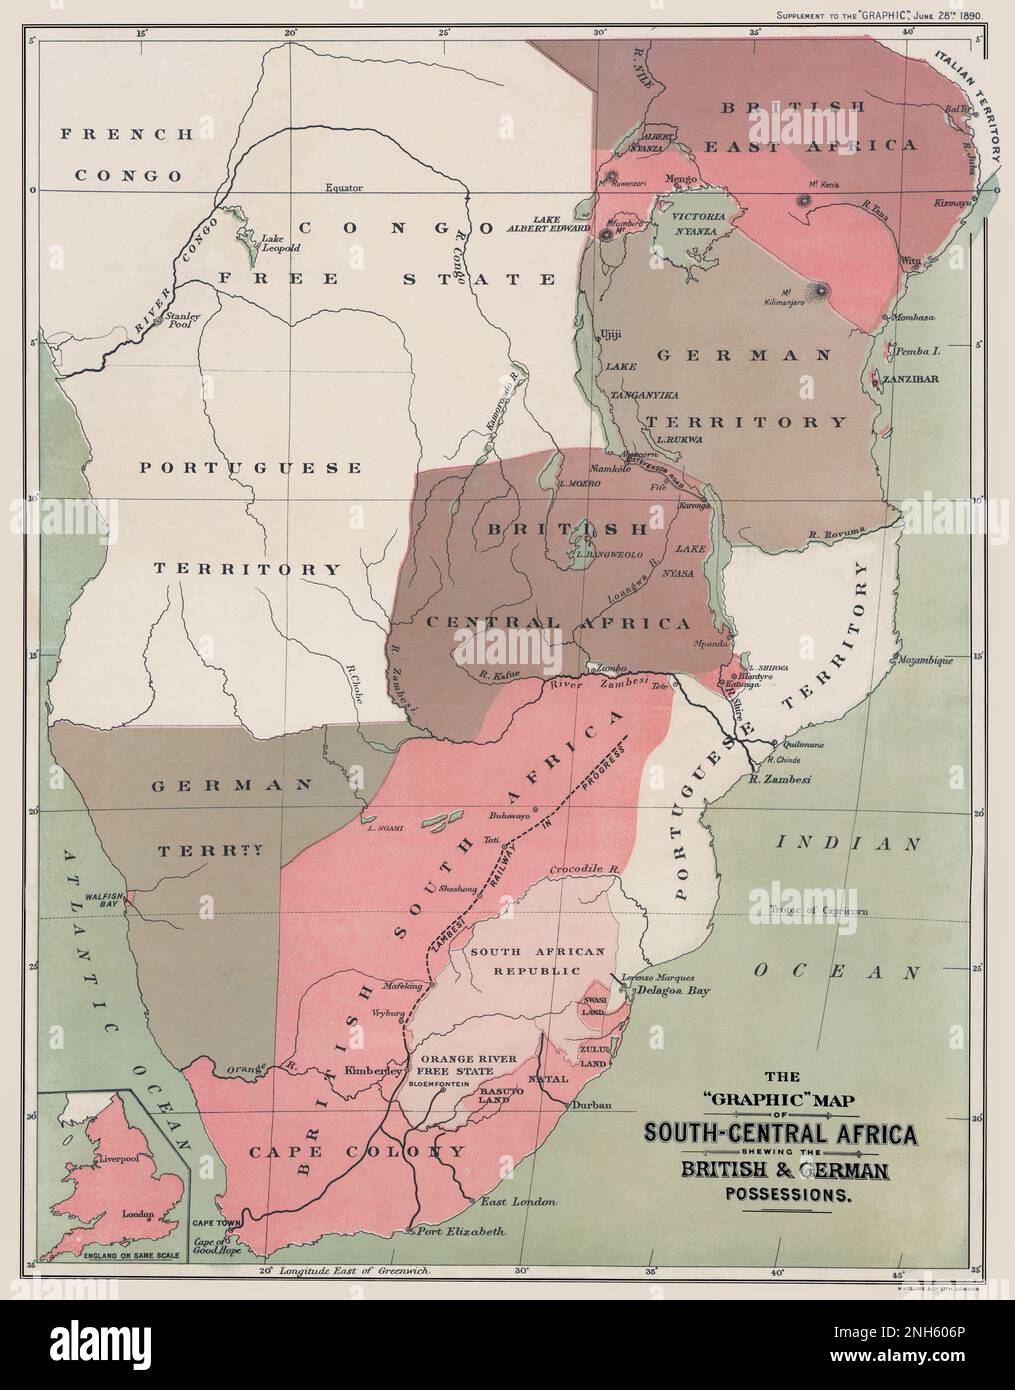 Central Africa Map dated 1890 showing European Possessions. Original title: 'The Graphic map of South-Central Africa: shewing the British & German possessions.'  This is an enhanced, restored reproduction of an historic map showing European colonization in South Central Africa in the late 19th century. This restored, detailed reproduction documents the extent of European control in this part of Africa. The nations claiming territory include the British, Germany, Italy, France, and Portugal. Stock Photo